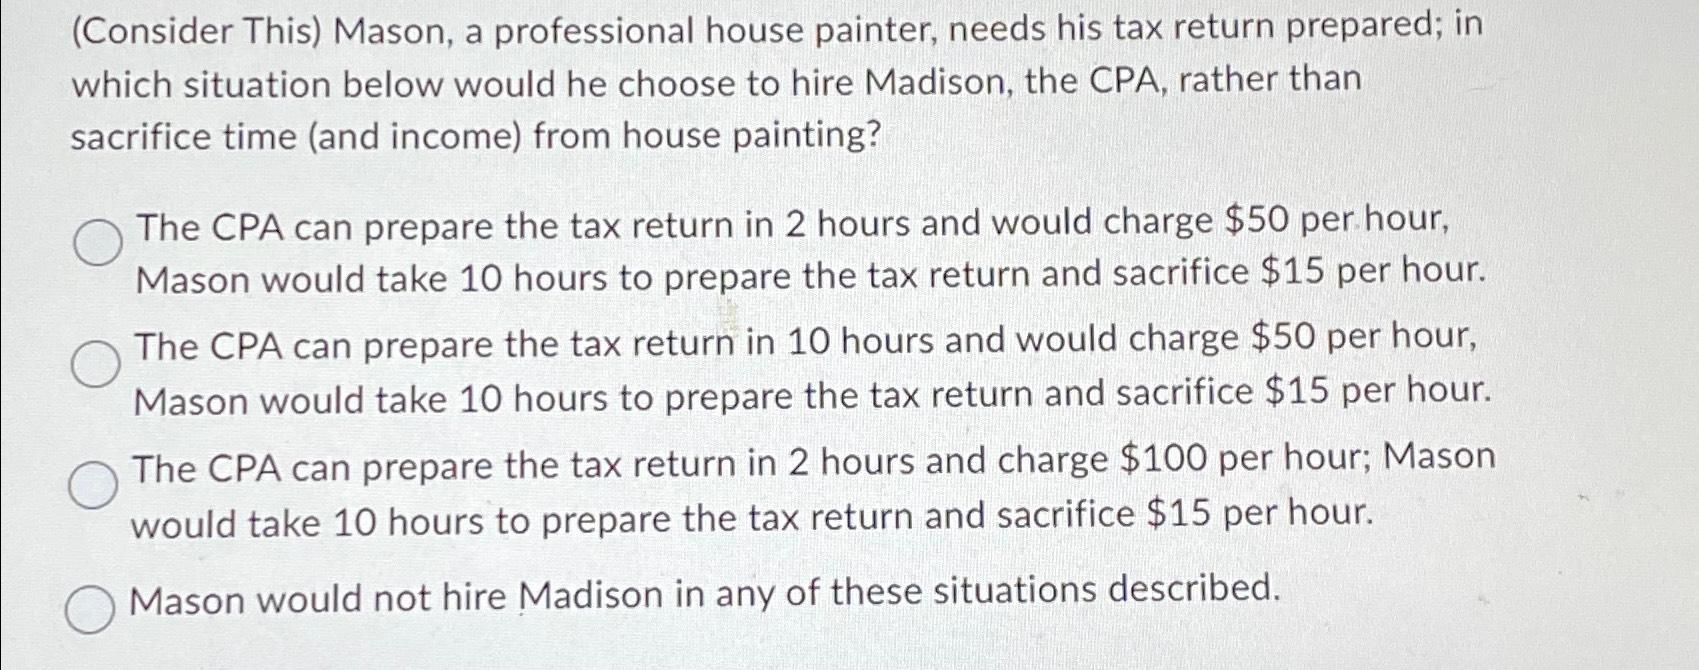 (Consider This) Mason, a professional house painter, needs his tax return prepared; in which situation below